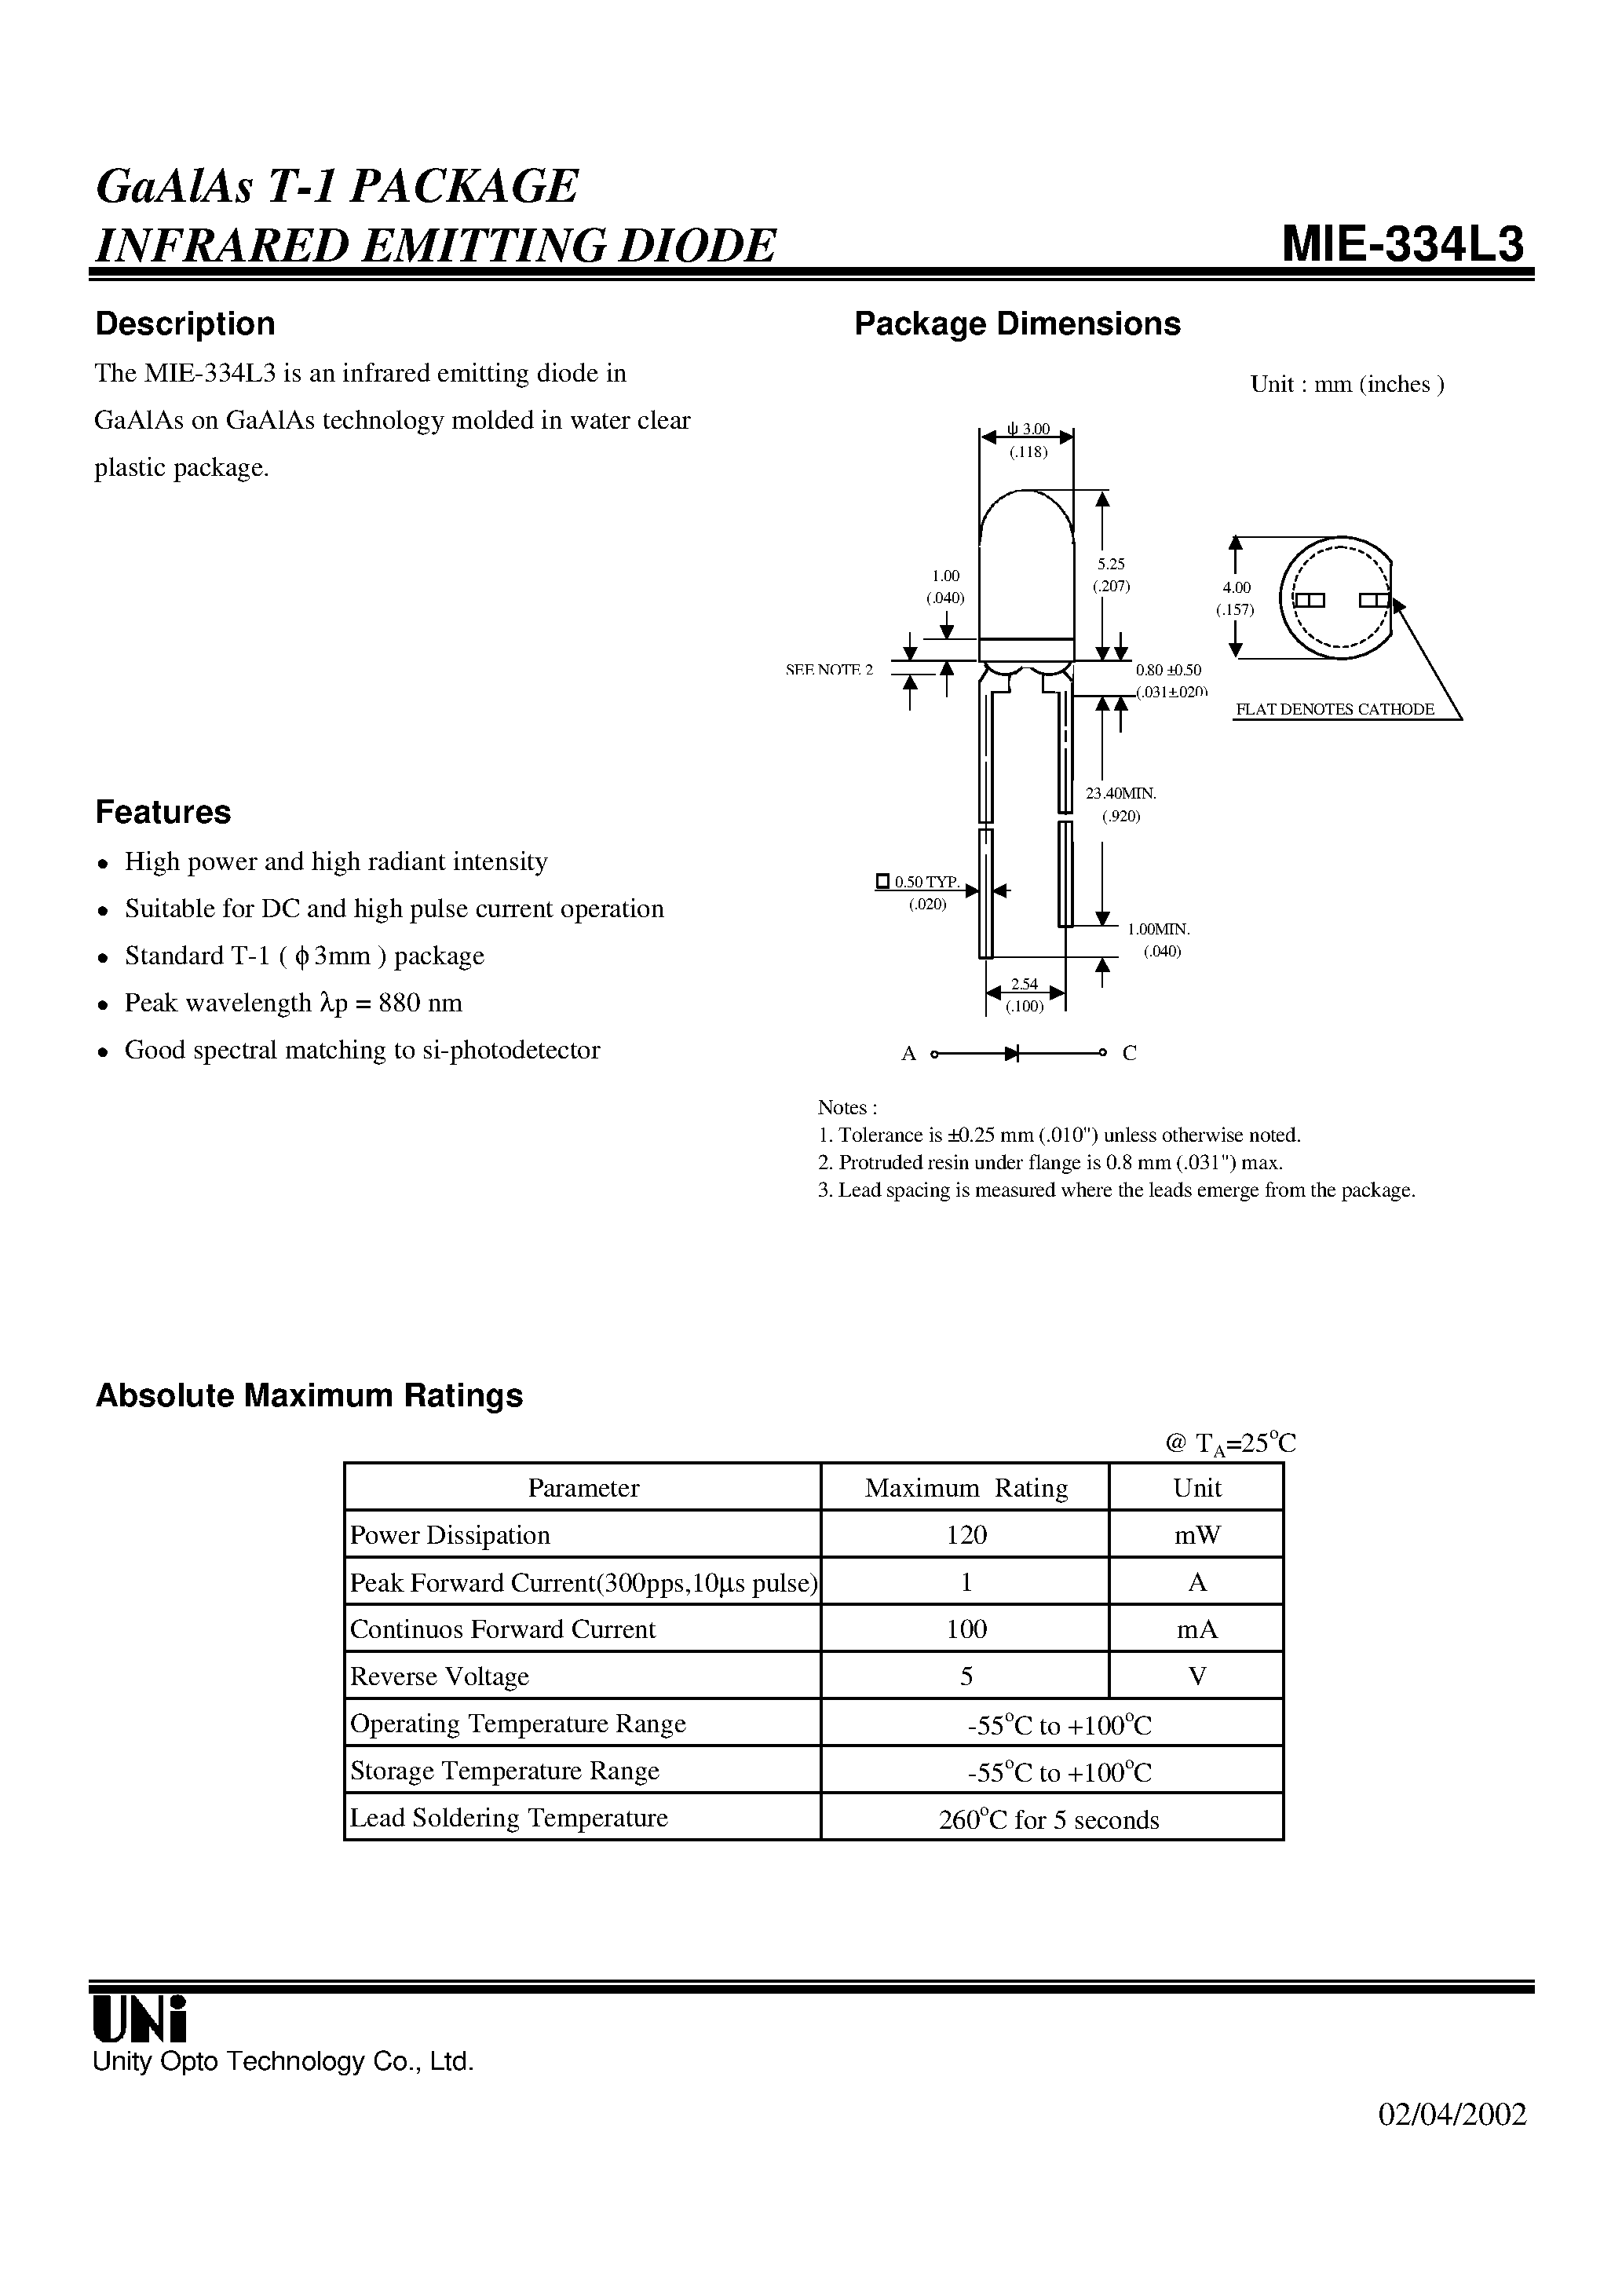 Datasheet MIE-334L3 - GaAlAs T-1 PACKAGE INFRARED EMITTING DIODE page 1